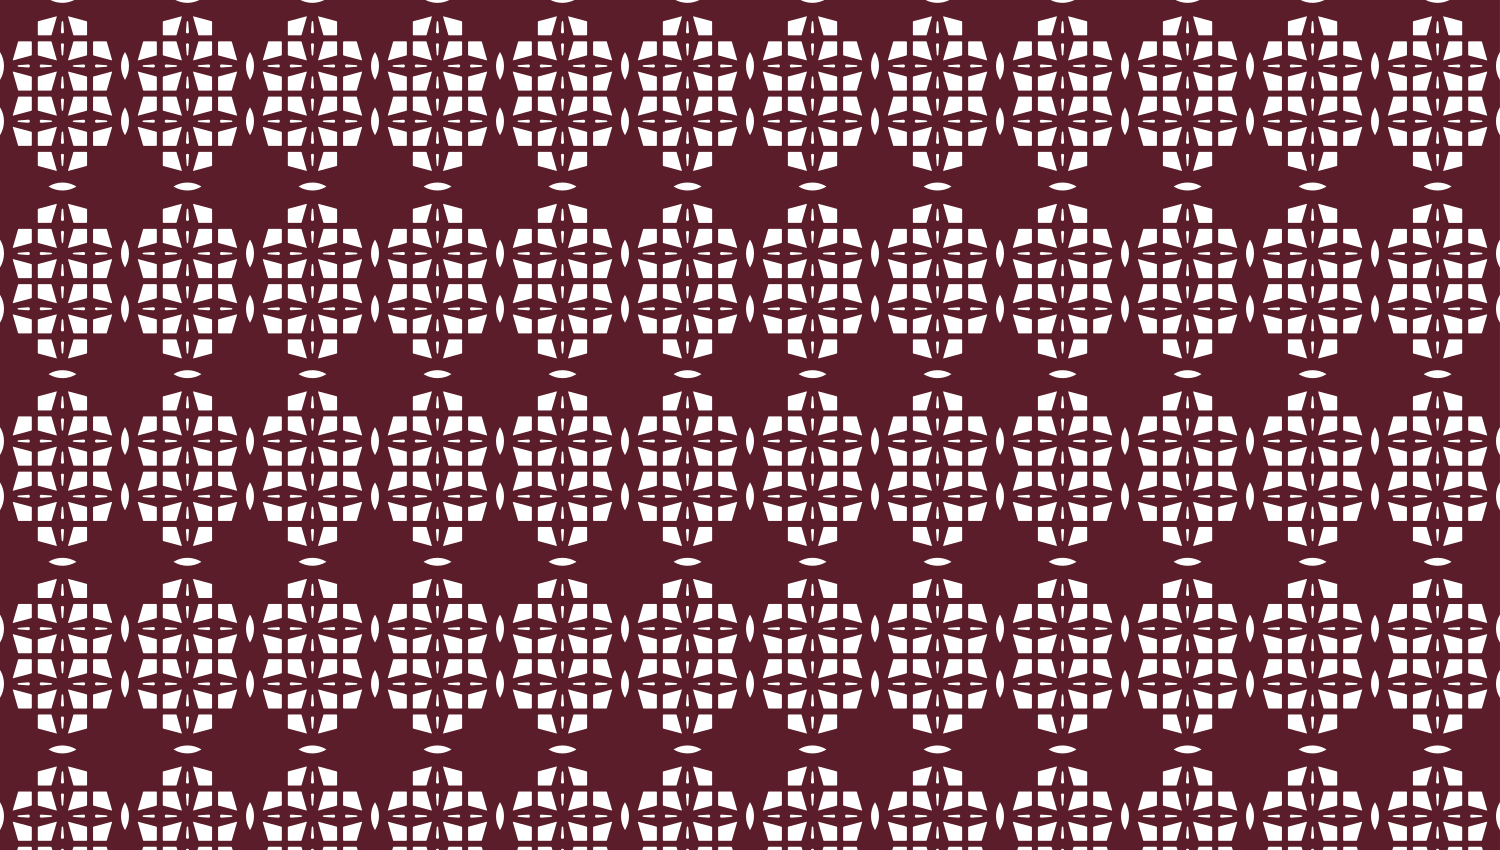 Parasoleil™ Geneva© pattern displayed with a burgundy color overlay